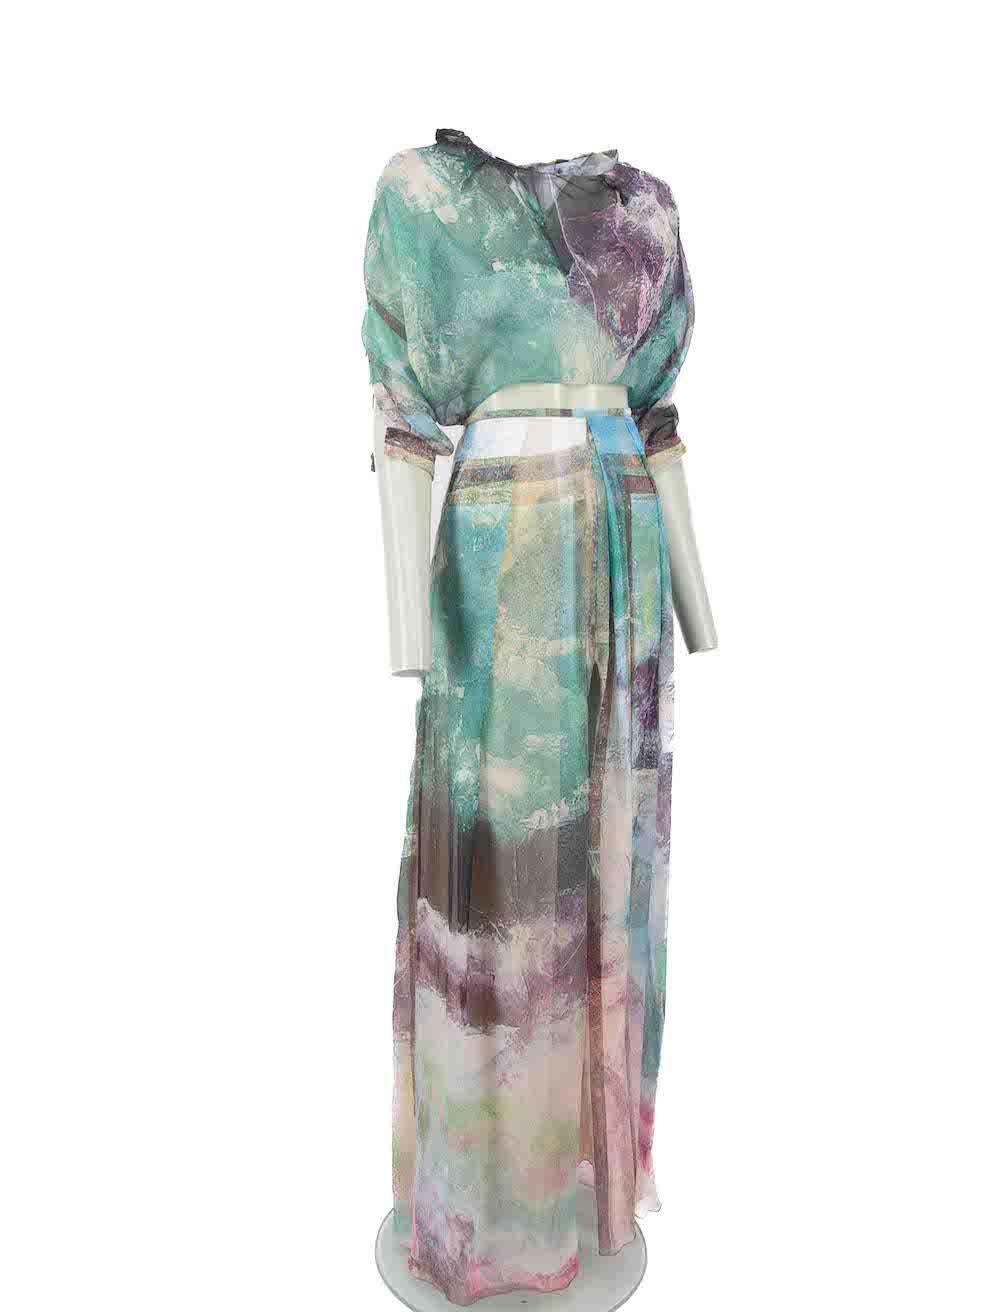 CONDITION is Very good. Minimal wear to set is evident. Minimal wear to top back neck and front neckline with small stitching holes on this used Sandra Mansour designer resale item.
 
Details
Multicolour
Silk
Top and skirt set
Abstract painting